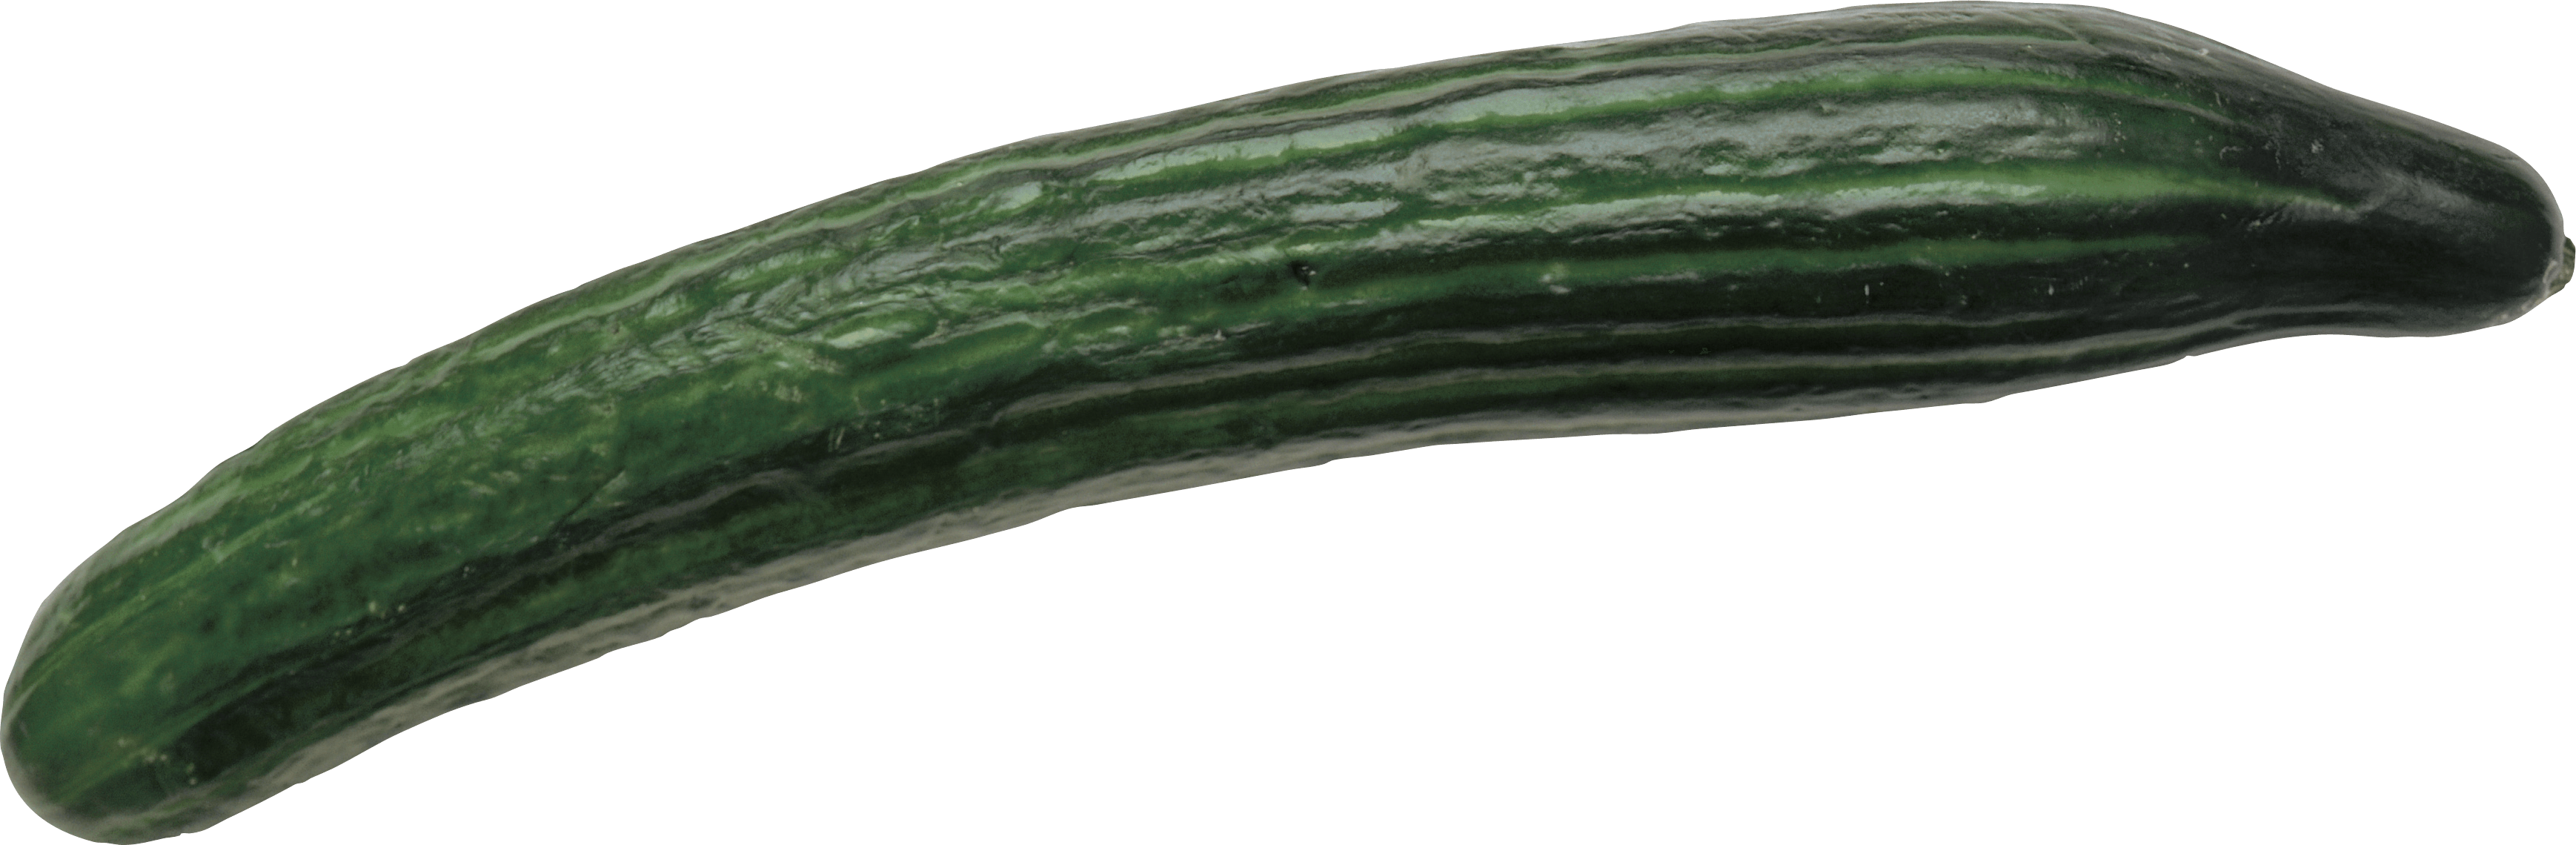 Cucumbers PNG Background